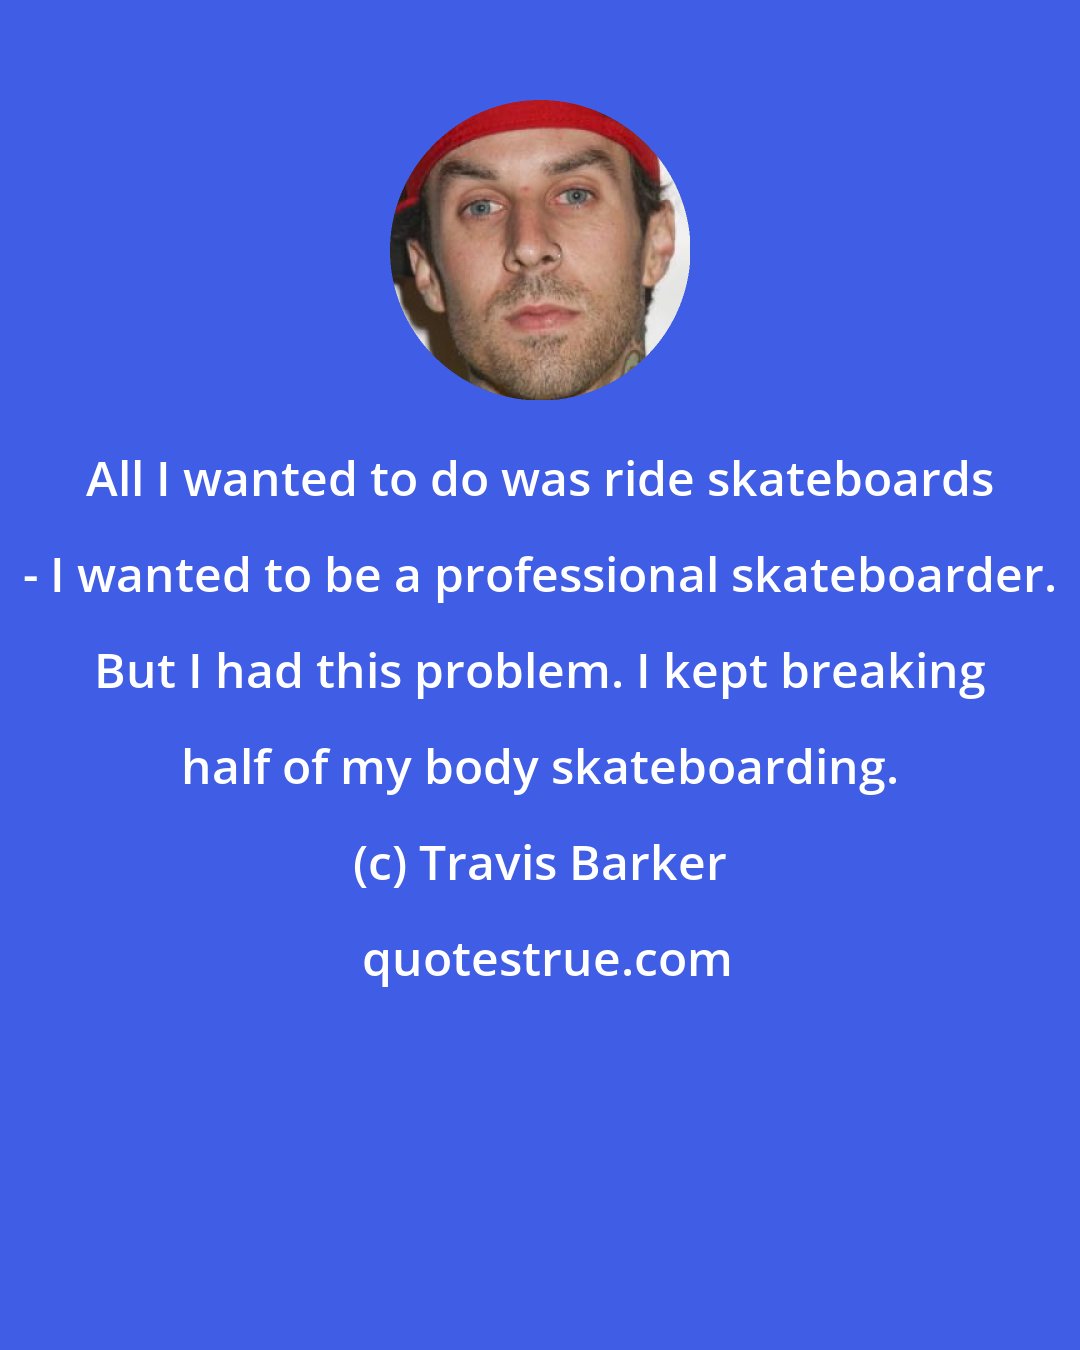 Travis Barker: All I wanted to do was ride skateboards - I wanted to be a professional skateboarder. But I had this problem. I kept breaking half of my body skateboarding.